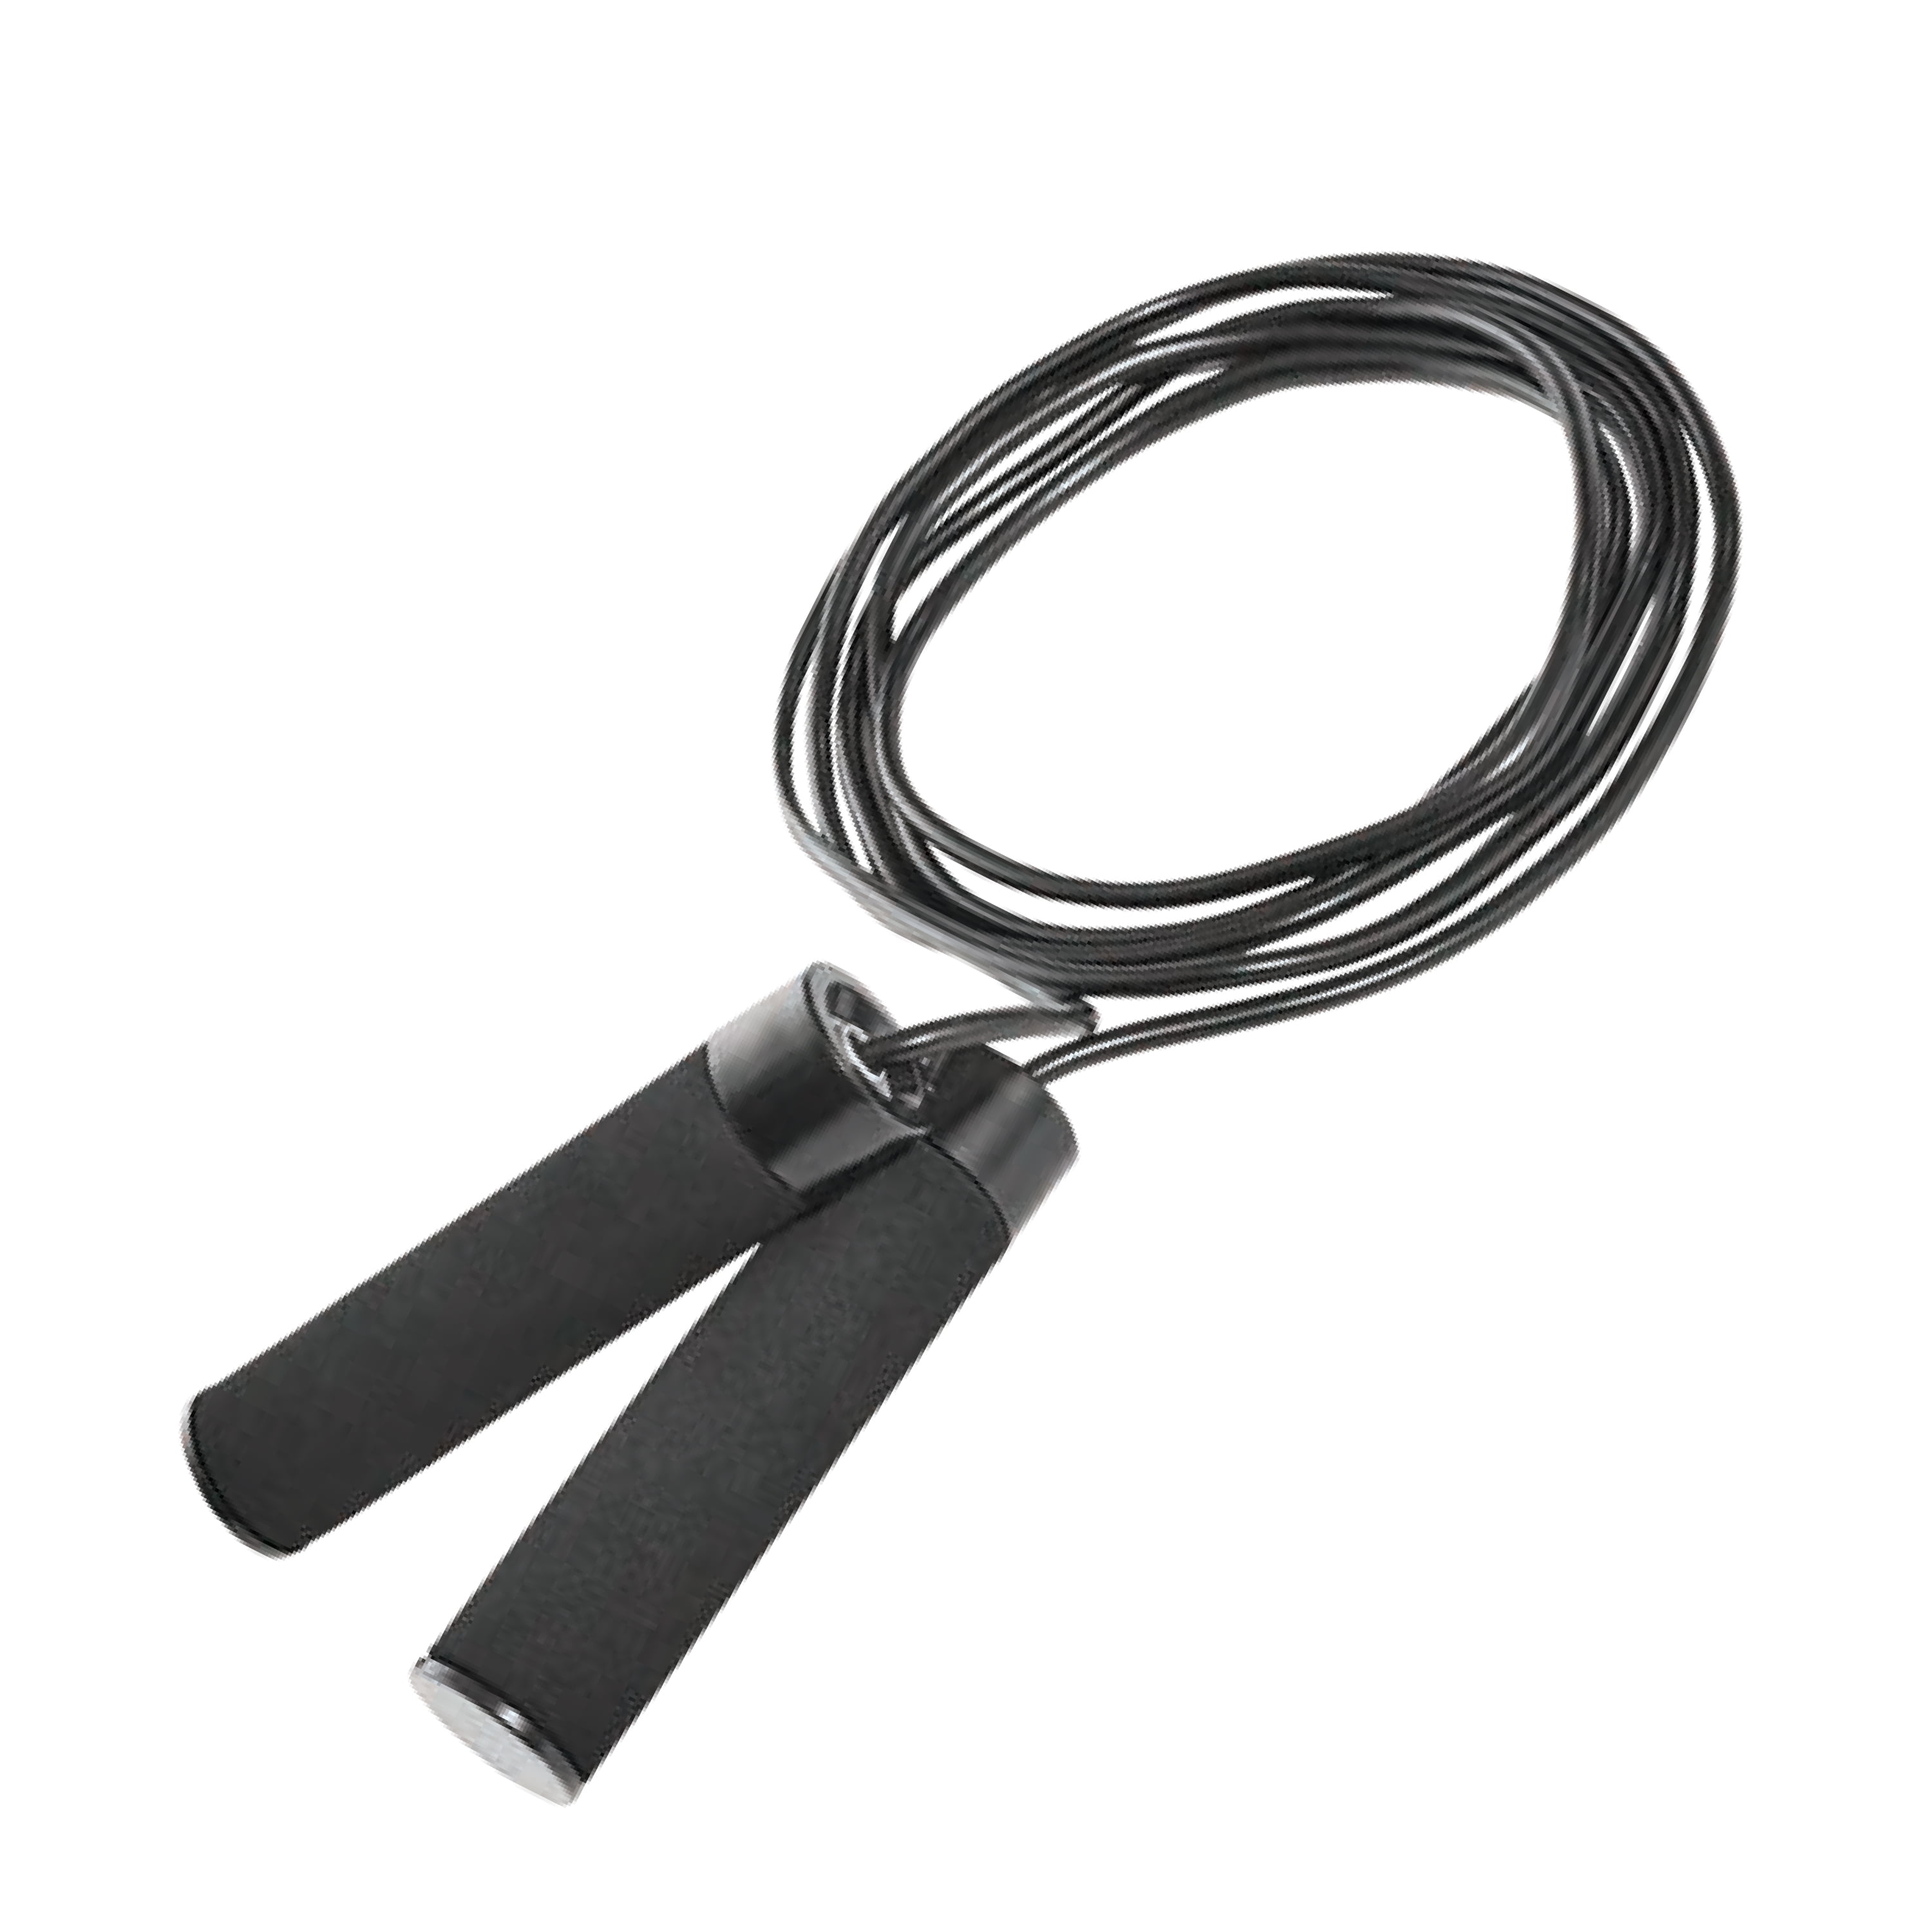 Athletic Works Conditioning Rope - Black - 18 ft